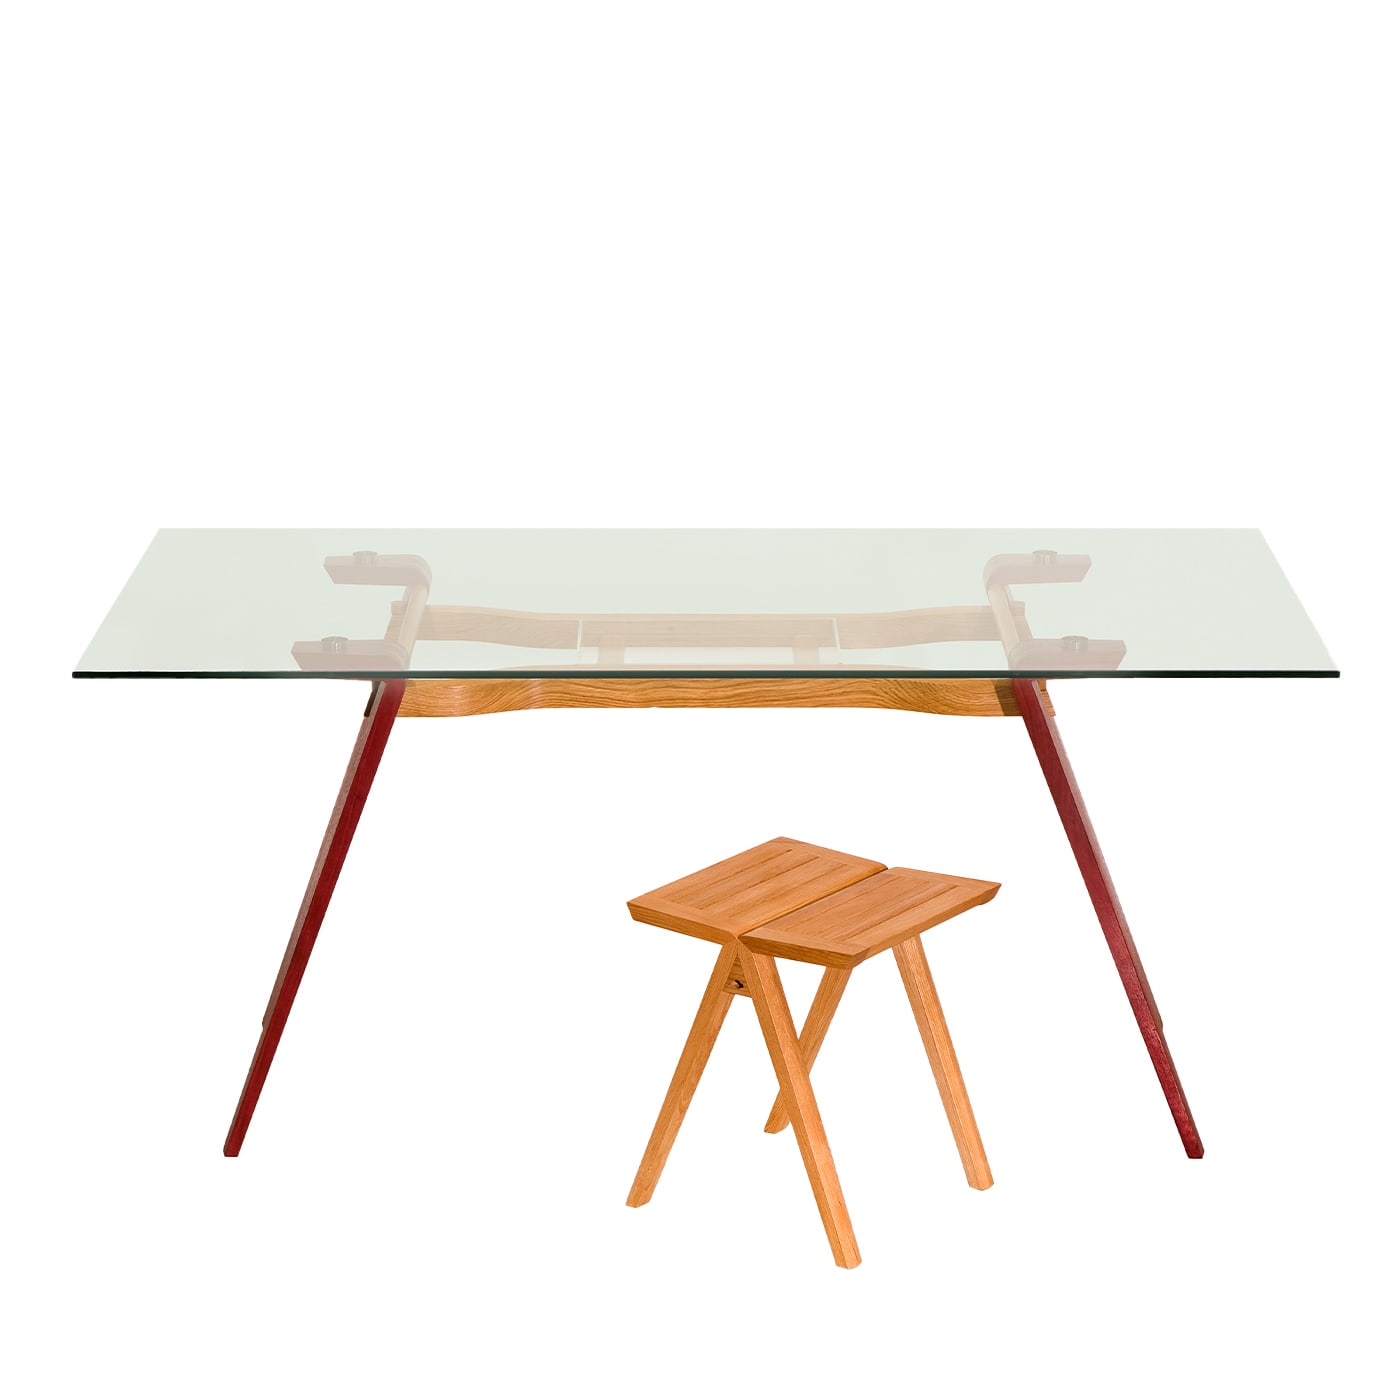 Clio Dining Table - Slow Wood by Gianni Cantarutti